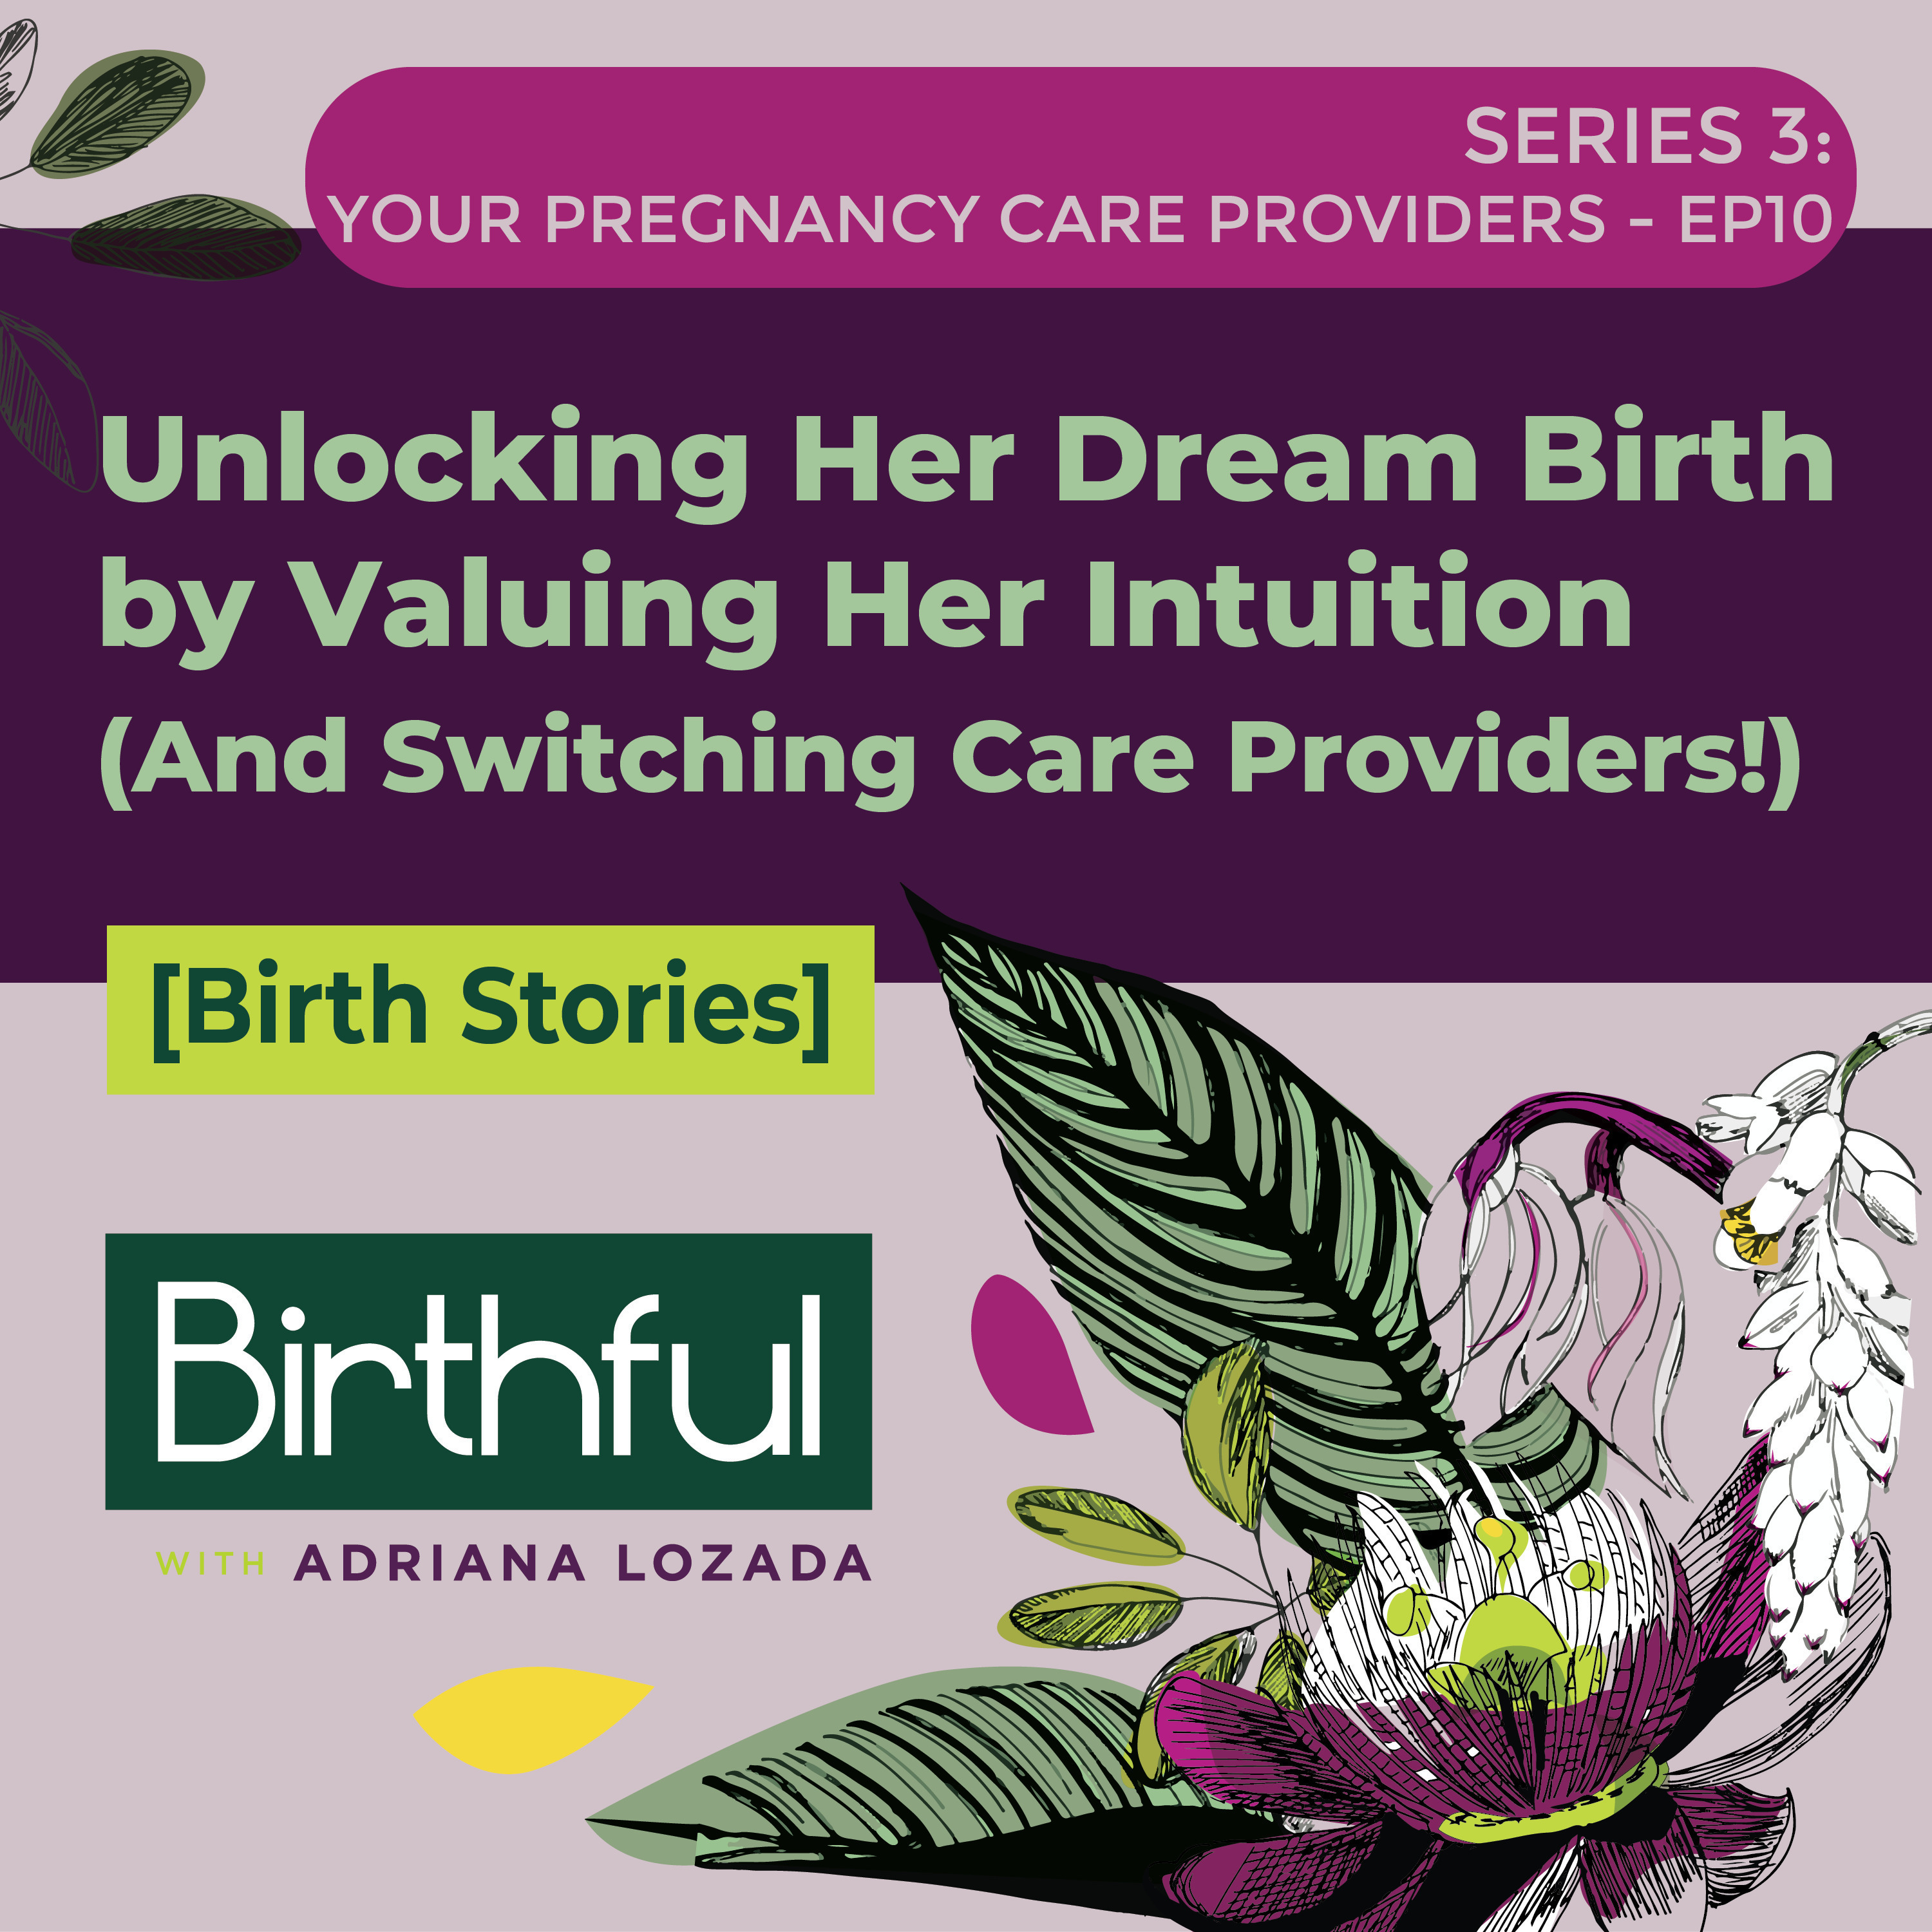 [Birth Stories] Unlocking Her Dream Birth by Valuing Her Intuition (And Switching Care Providers!)